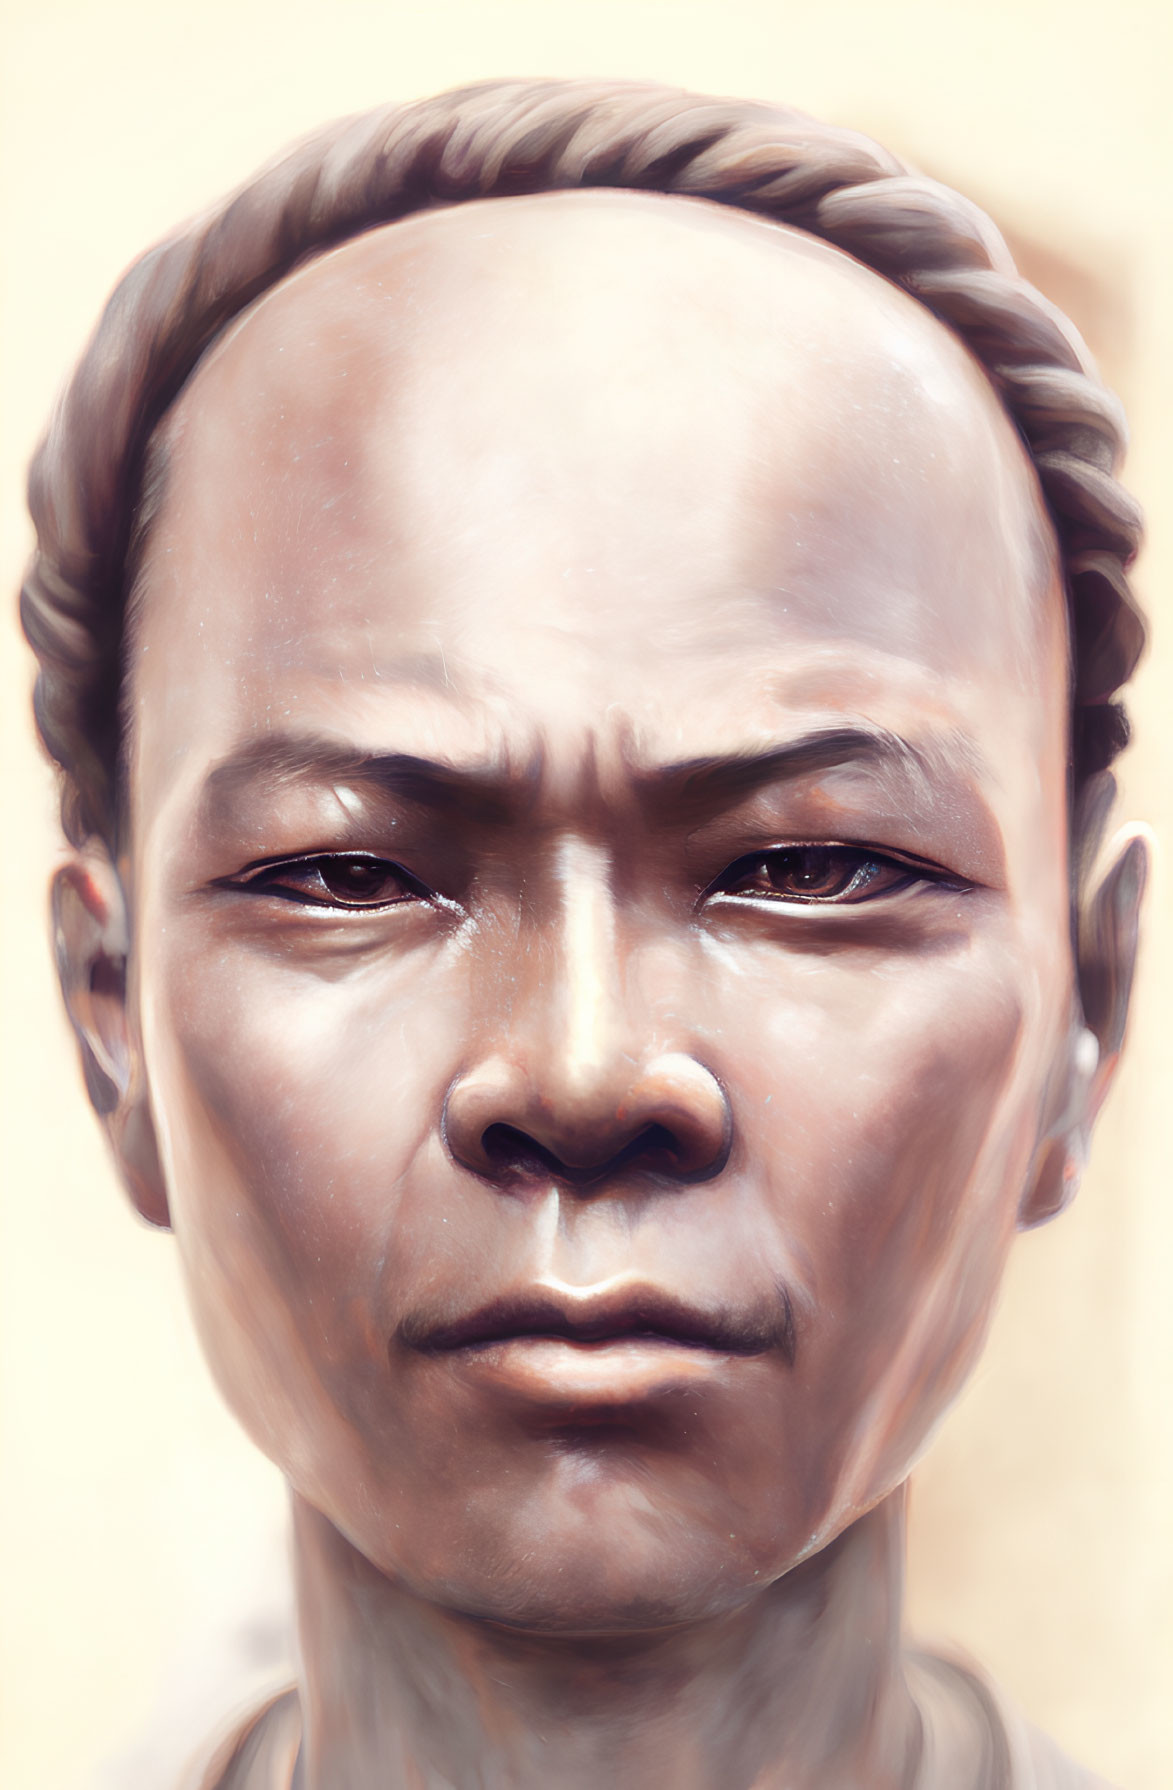 Detailed digital portrait of stern-faced individual with prominent cheekbones, narrow eyes, and receding hairline